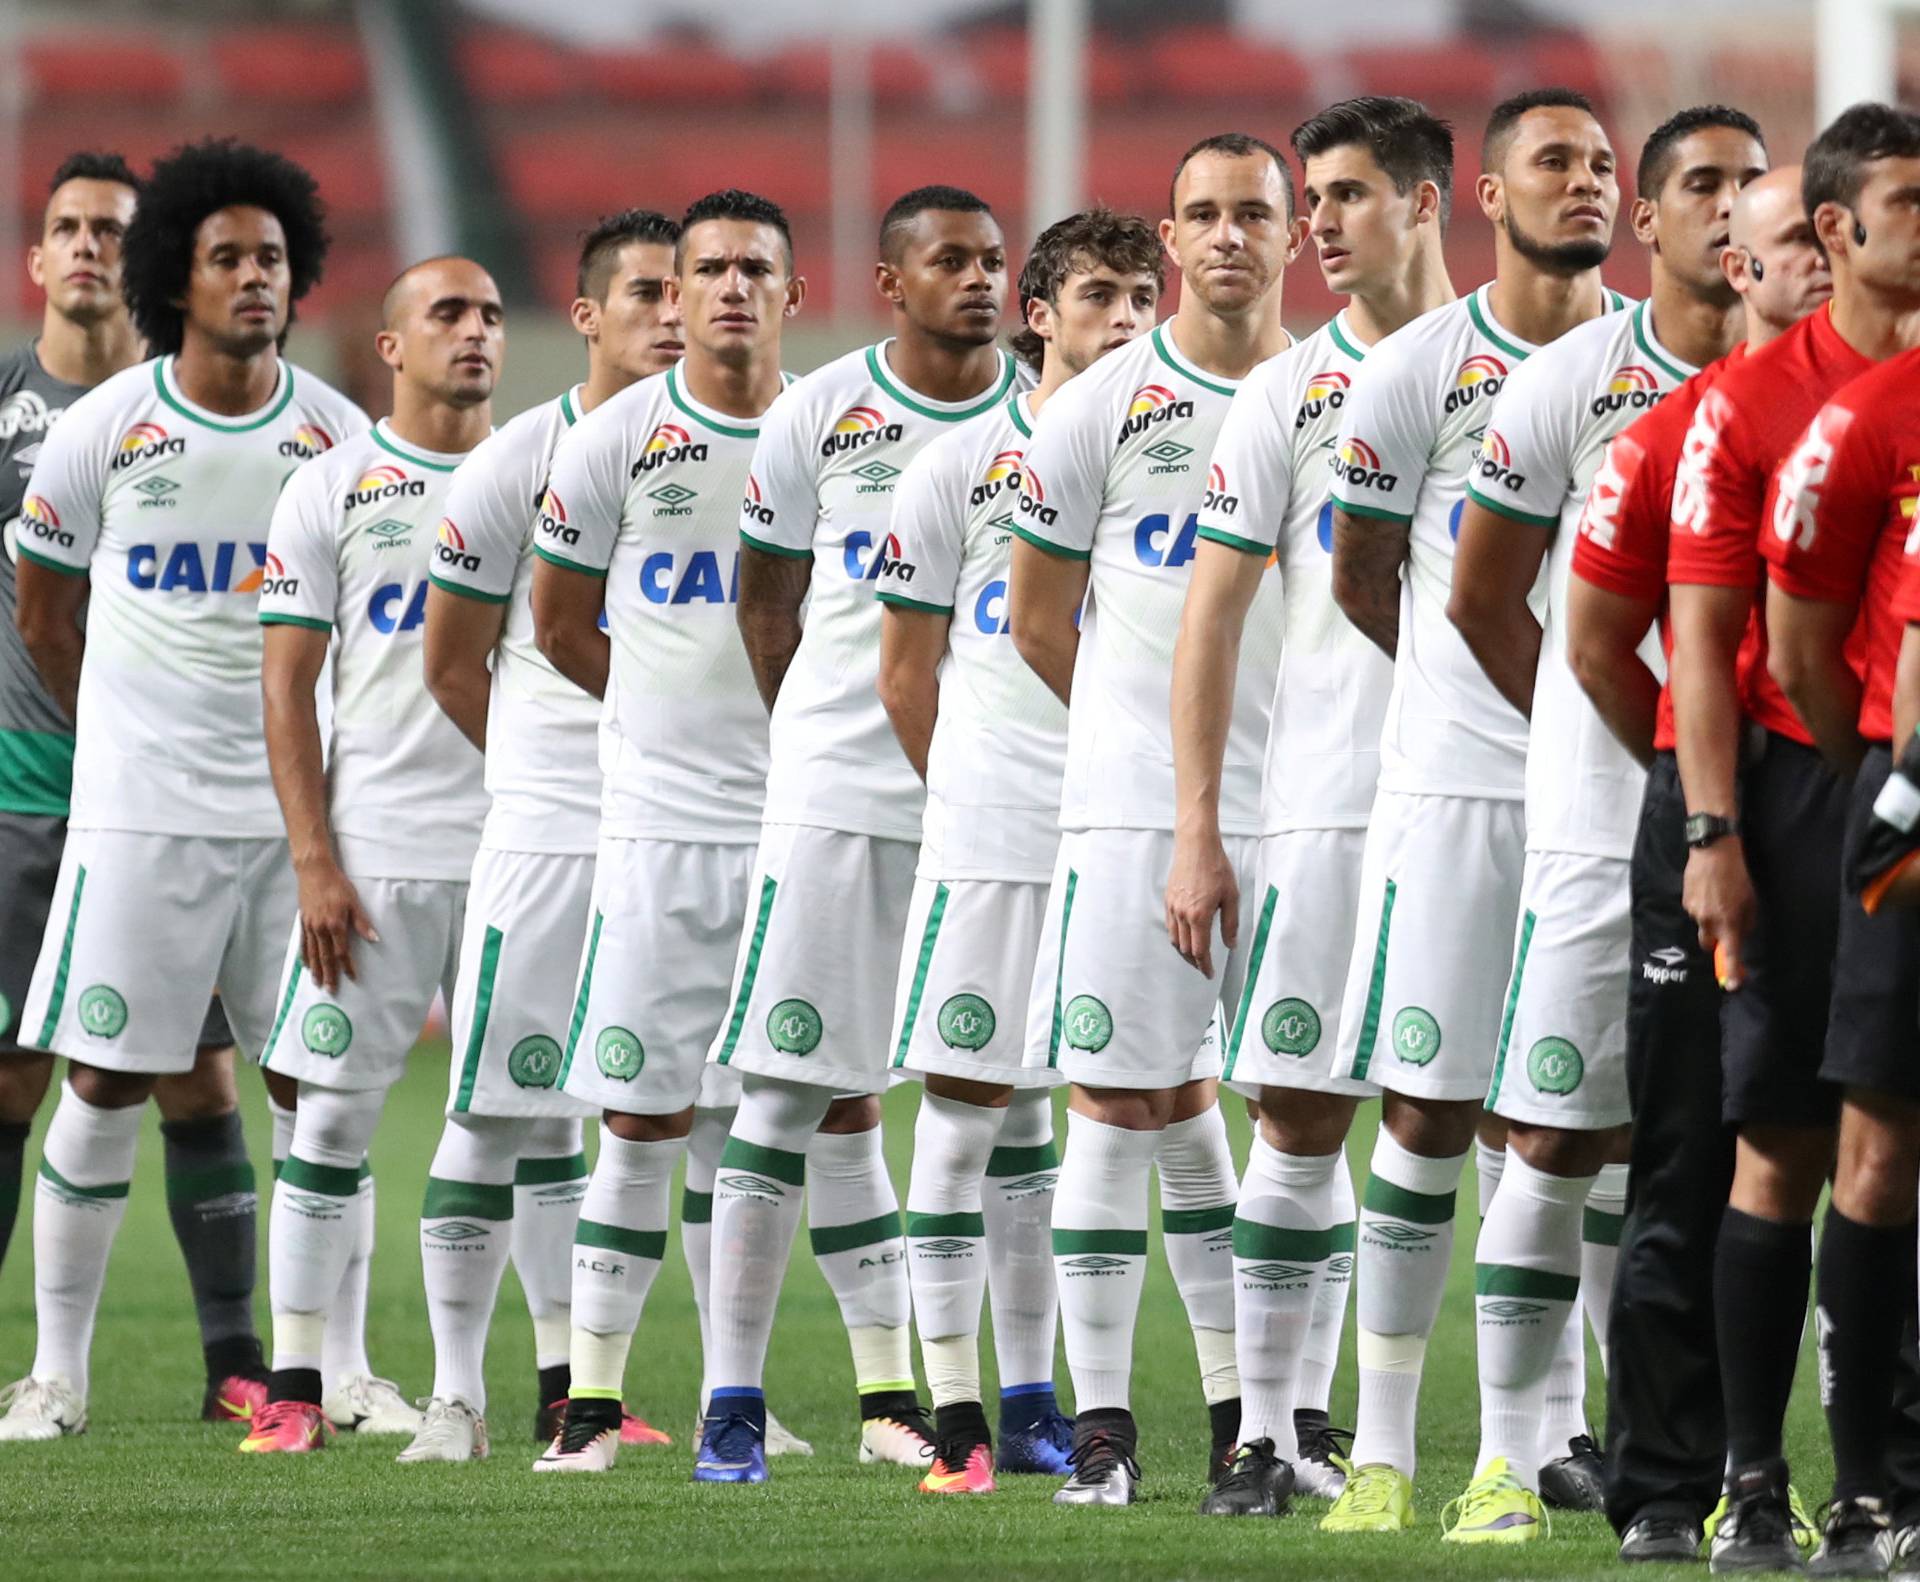 Players of Chapecoense soccer team stands before their Brazilian Series A Championship match against America Mineiro in Belo Horizonte